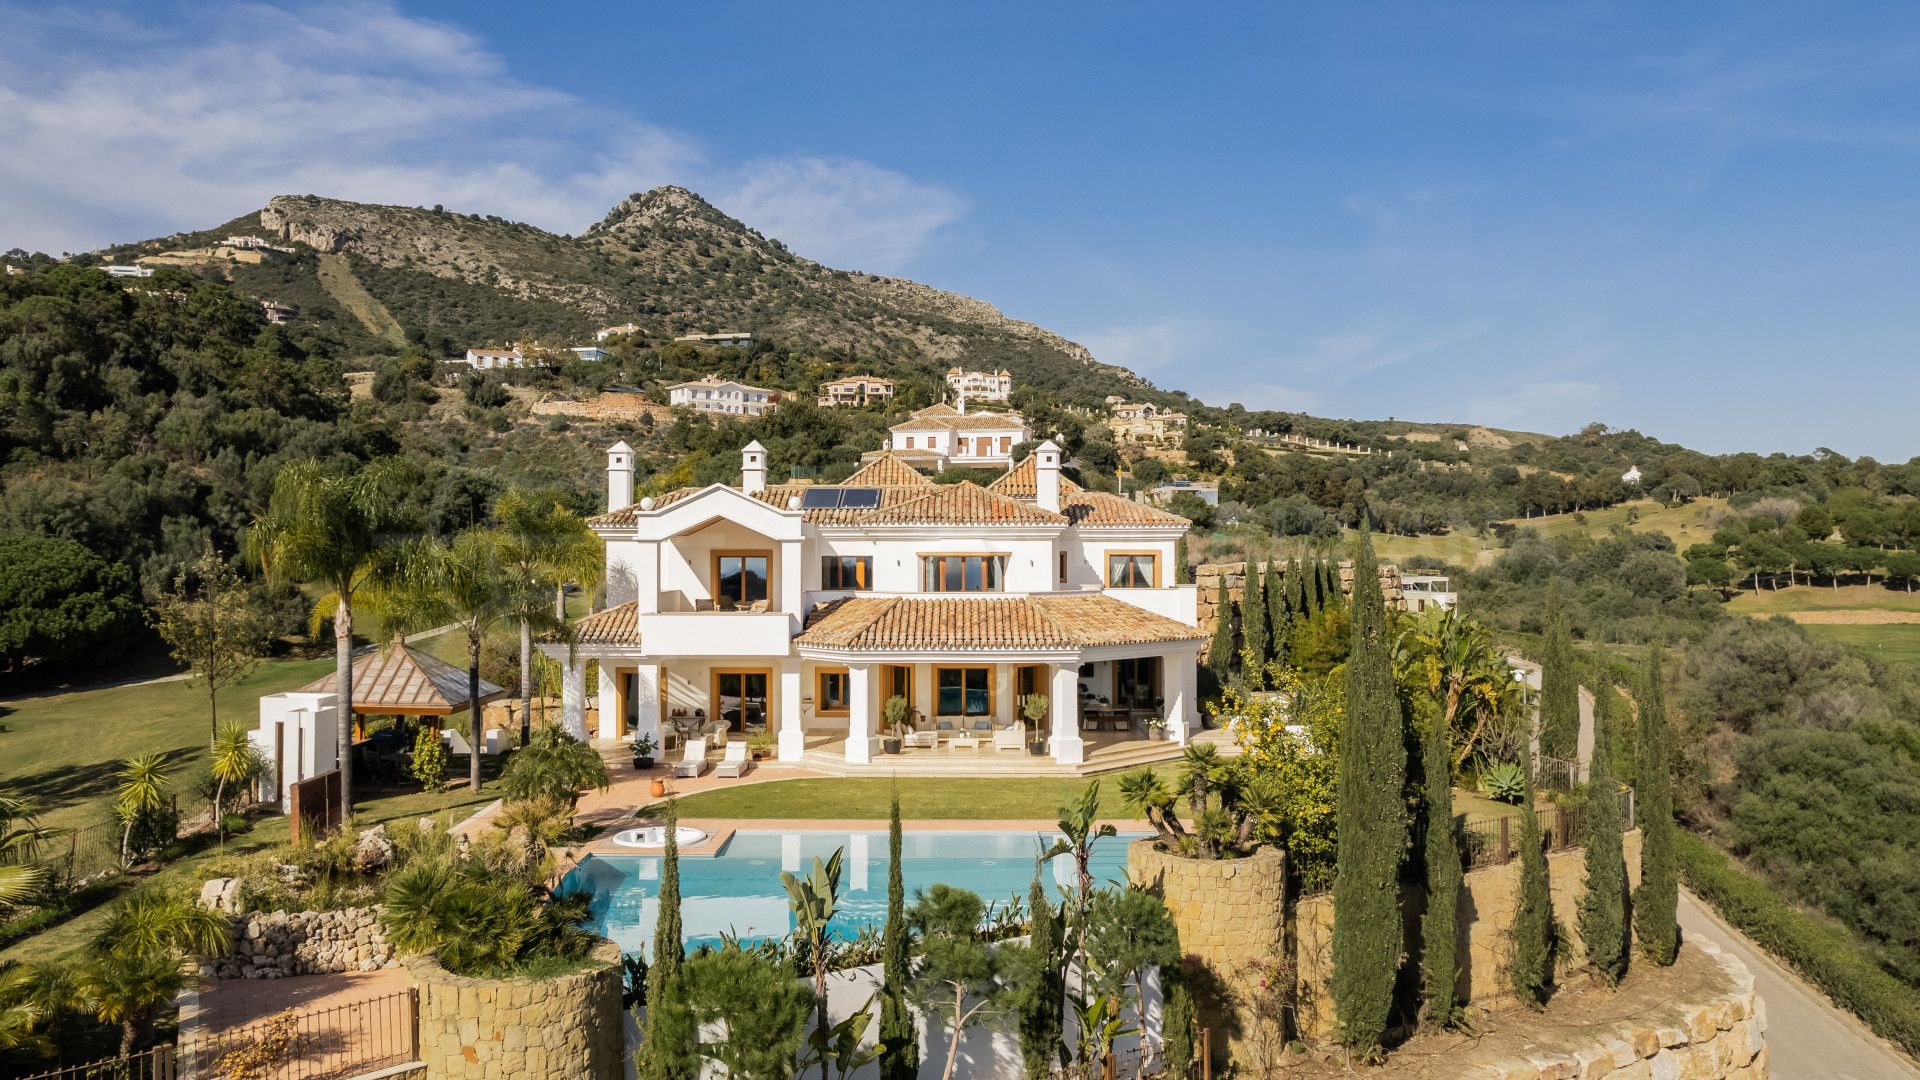 There’s Non-Resident Income Tax On My Spanish Holiday Home?